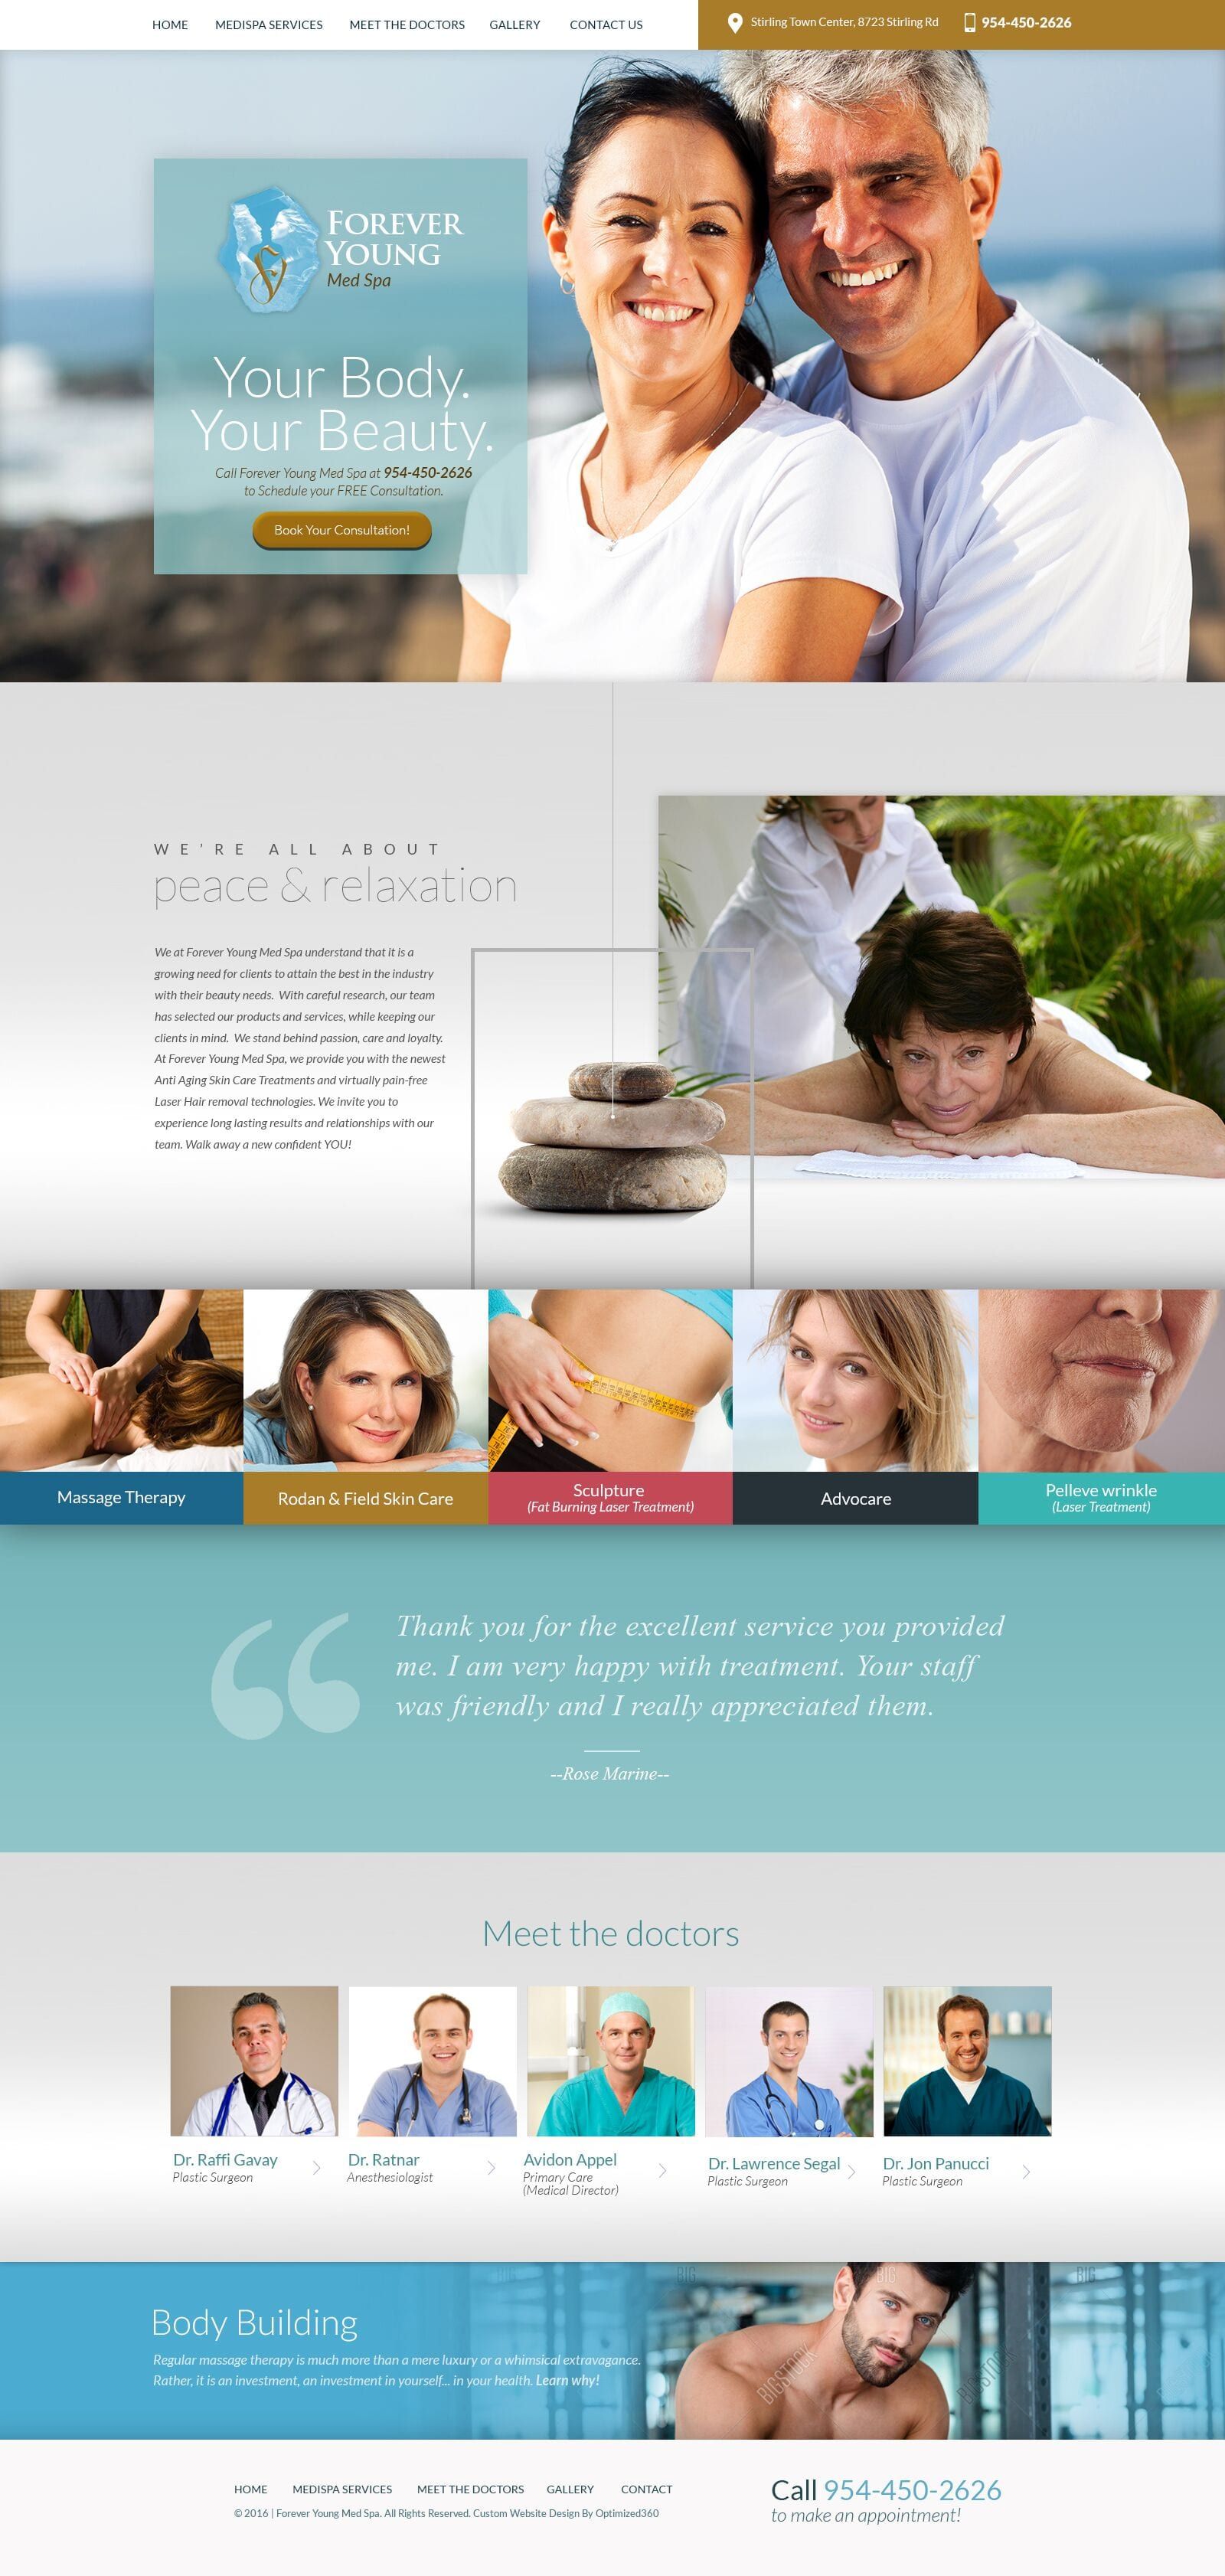 Forever Young Medical Spa Website